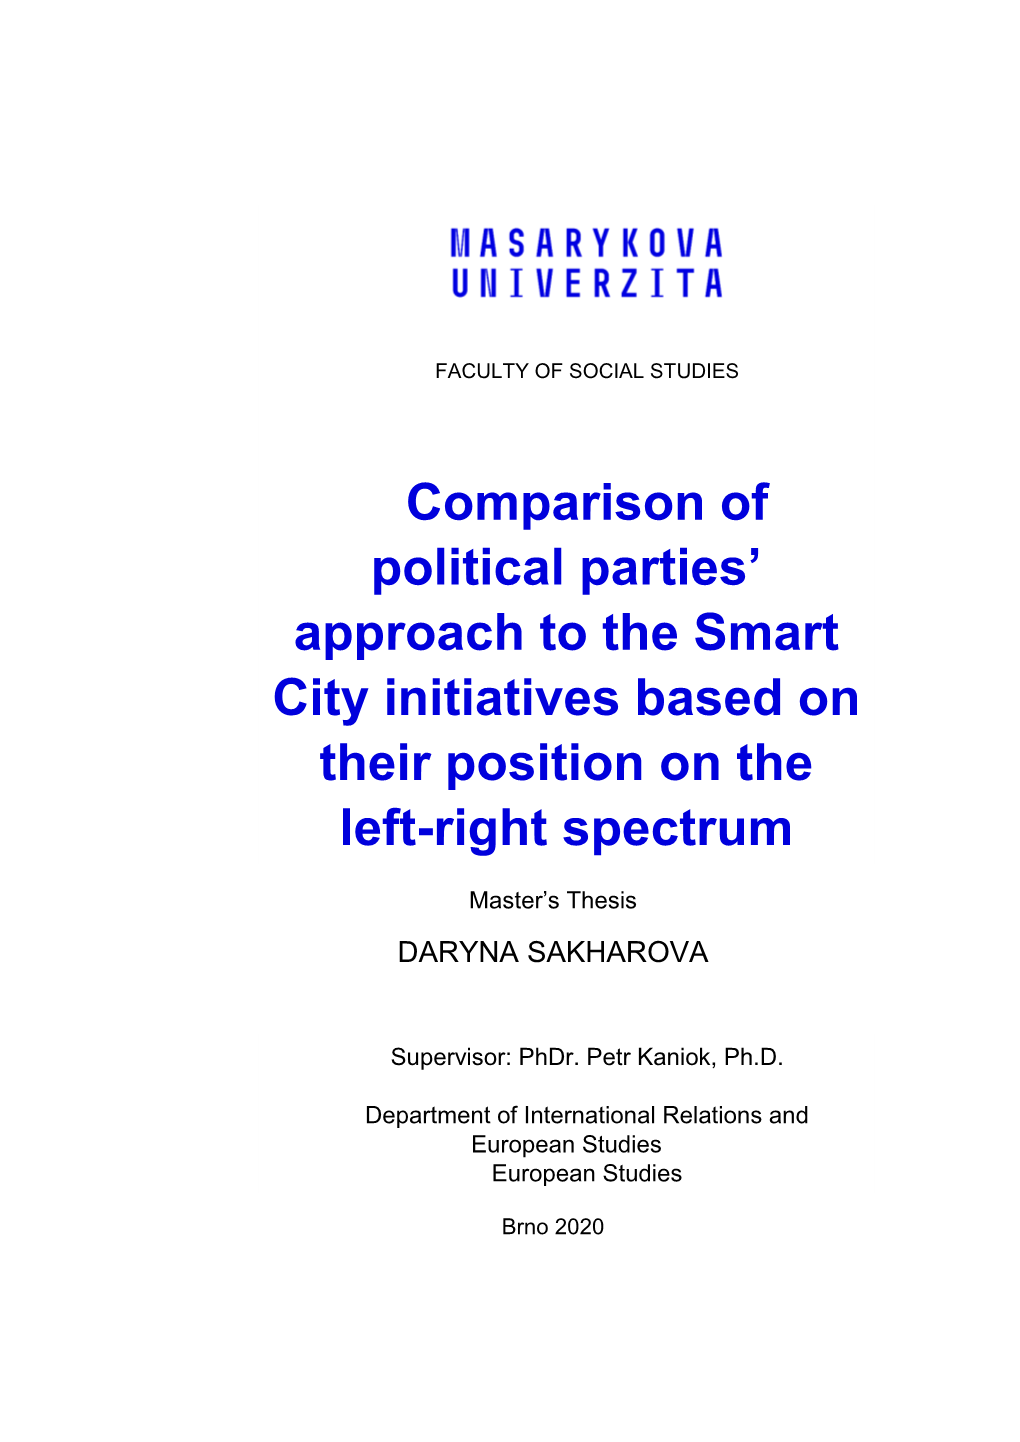 Comparison of Political Parties' Approach to the Smart City